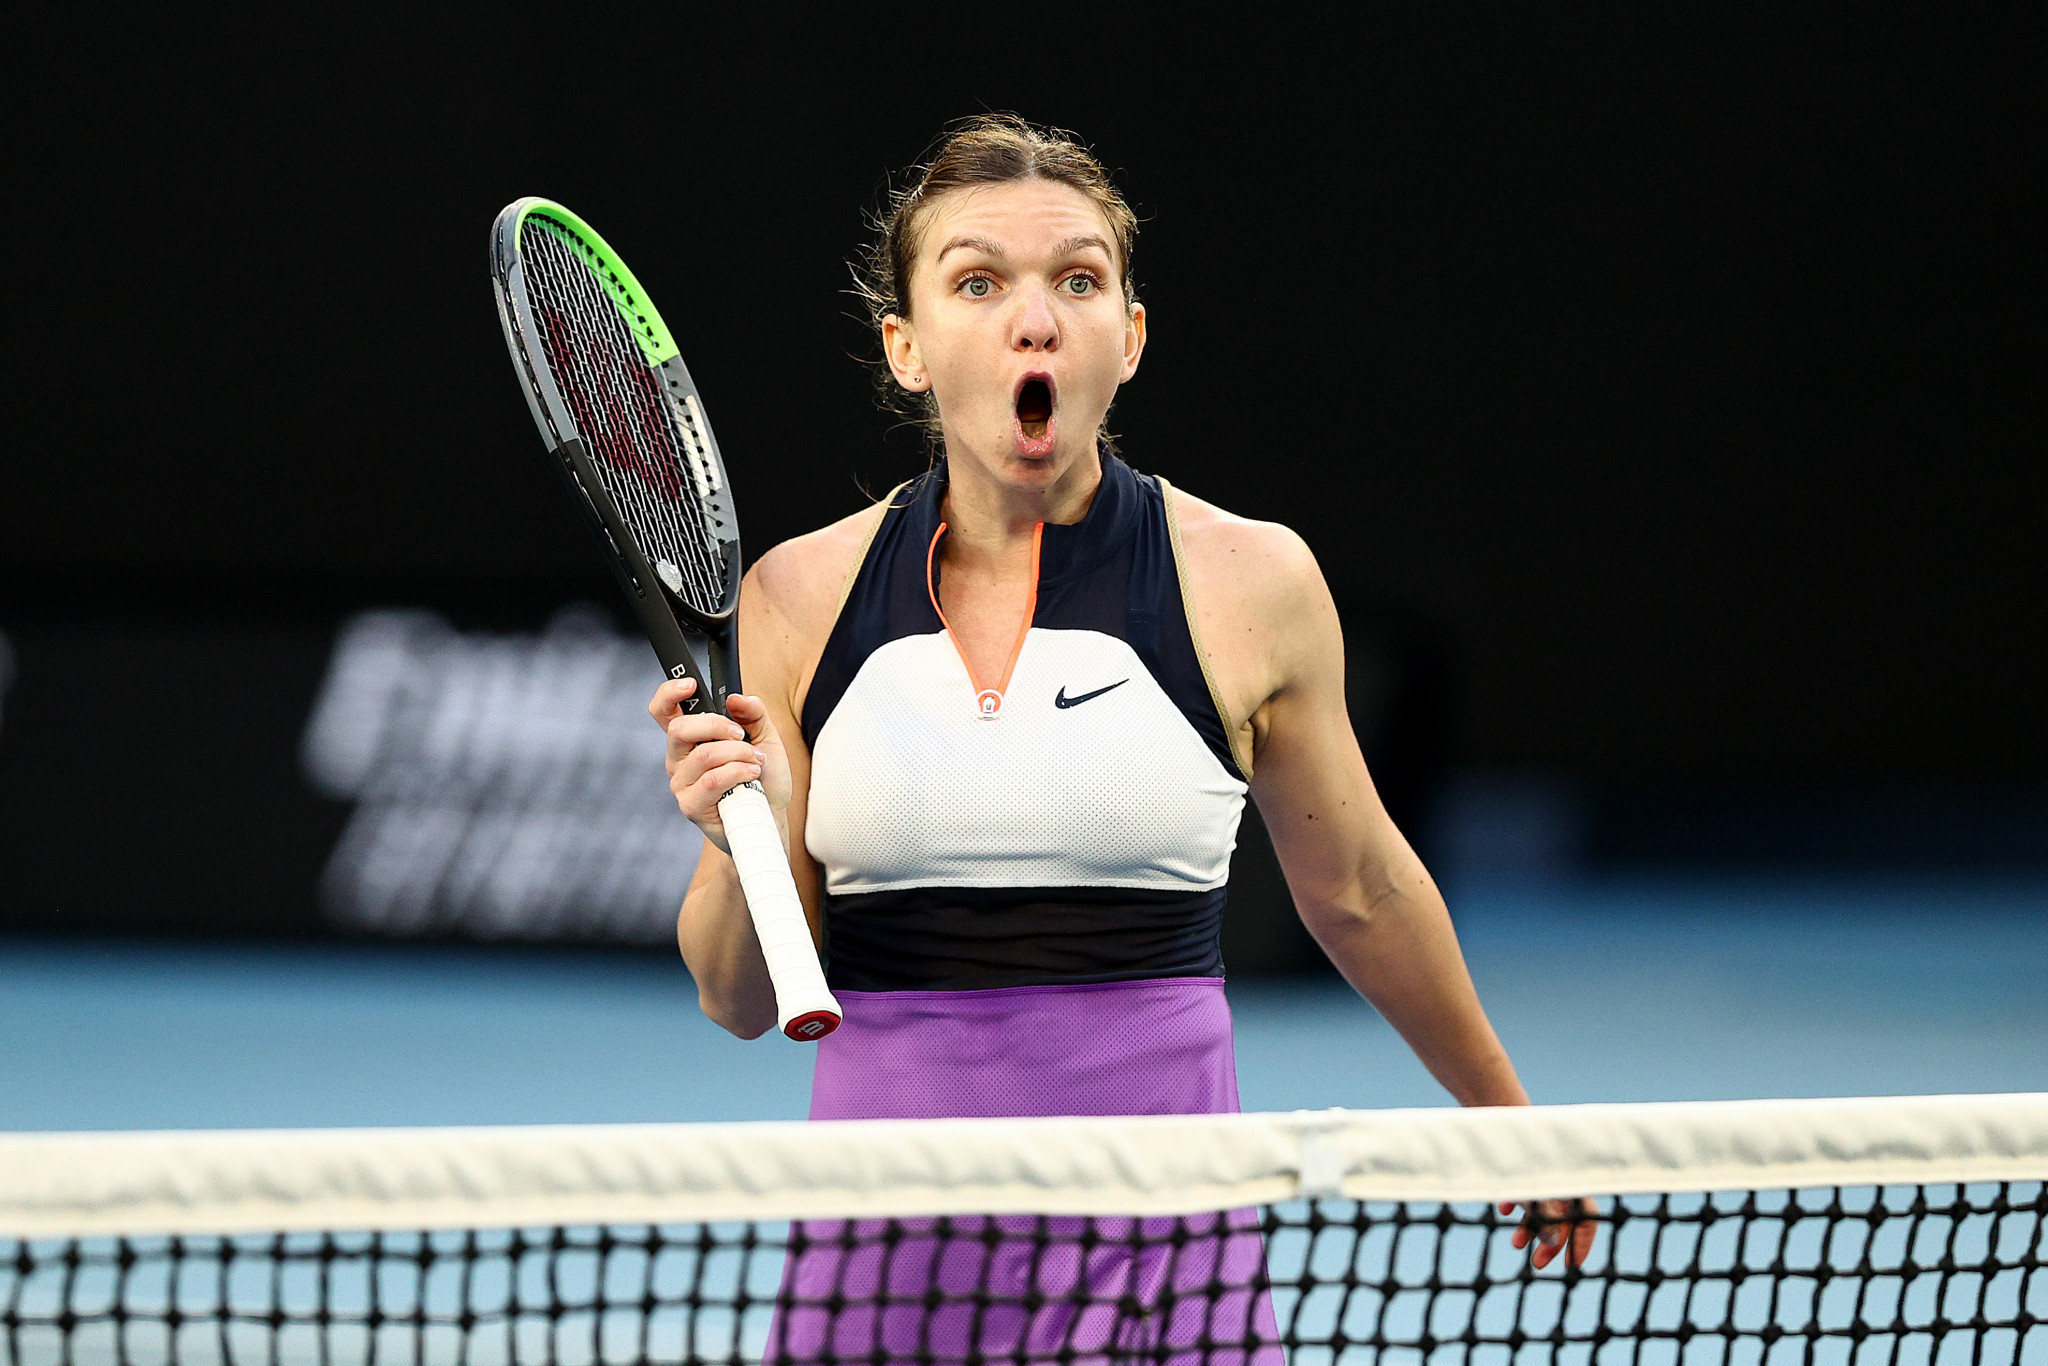 Romania's Simona Halep enjoyed a comfortable passage through to the fourth round ©Getty Images